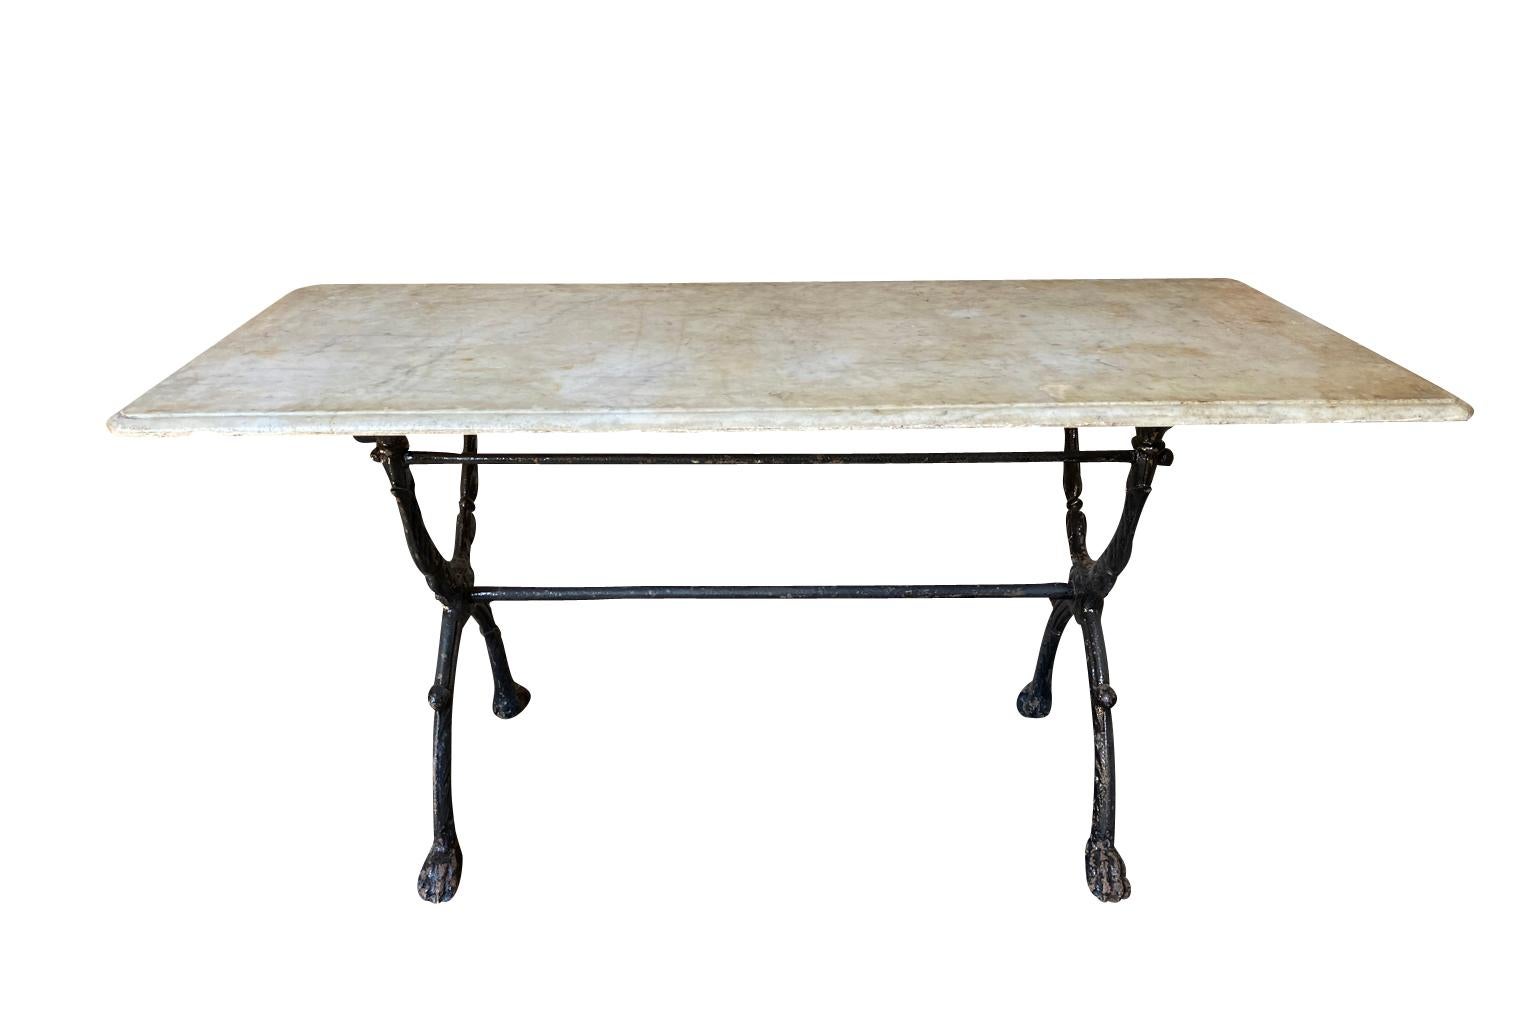 A very lovely early 19th century Garden Table from the Provence region of France. Soundly constructed with an elegant iron base with hoofed feet and its original marble top. Wonderful patina.